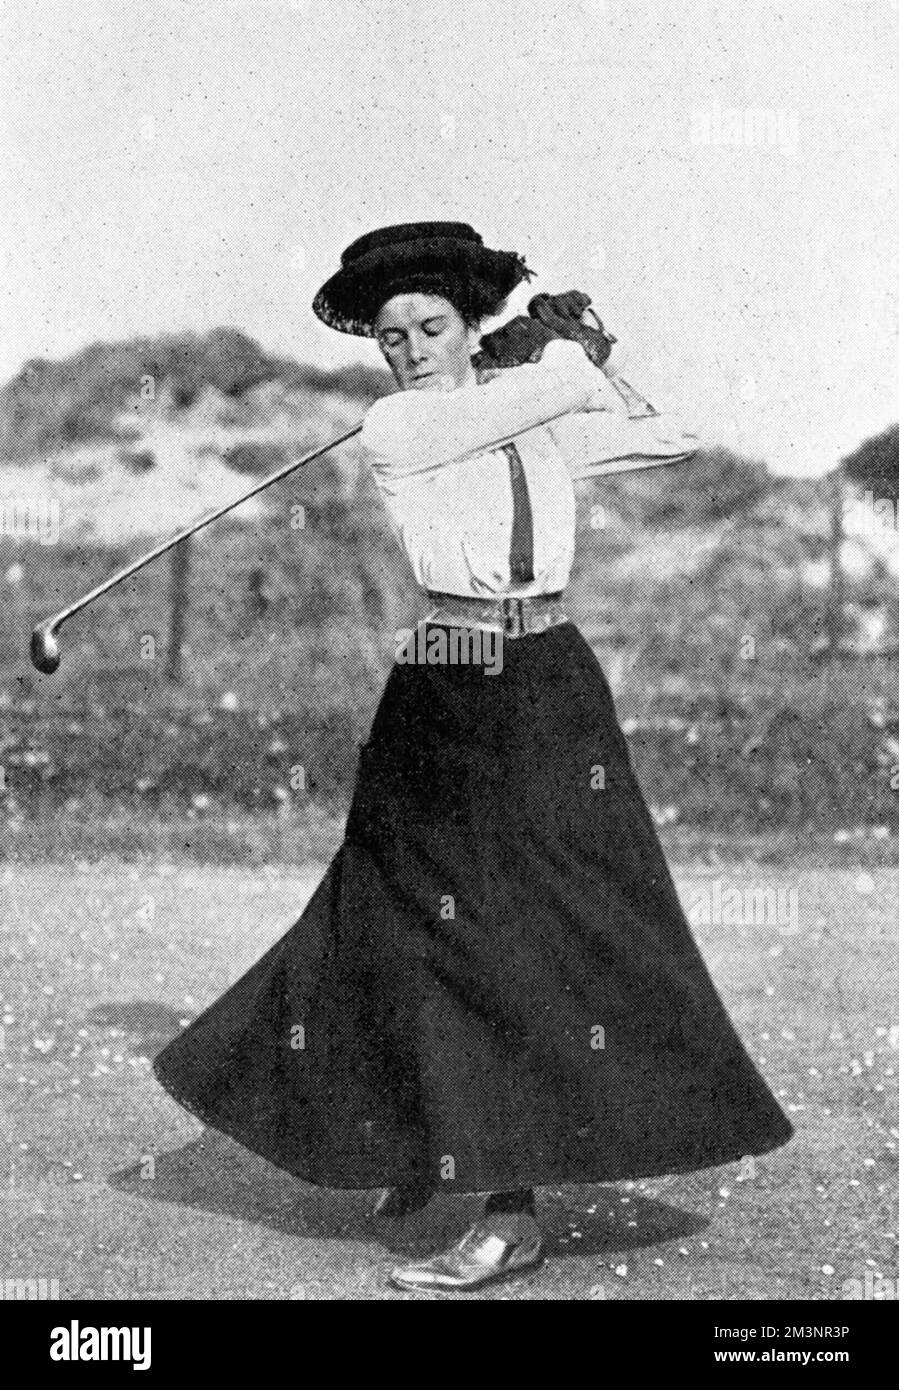 Dorothy Iona Campbell (1883 - 1945), the first internationally dominant female golfer.  Also known as Dorothy Hurd and Dorothy Howe.  Won over 700 titles during her career.  Died in a railway accident when she failed to notice an oncoming train.     Date: 1909 Stock Photo